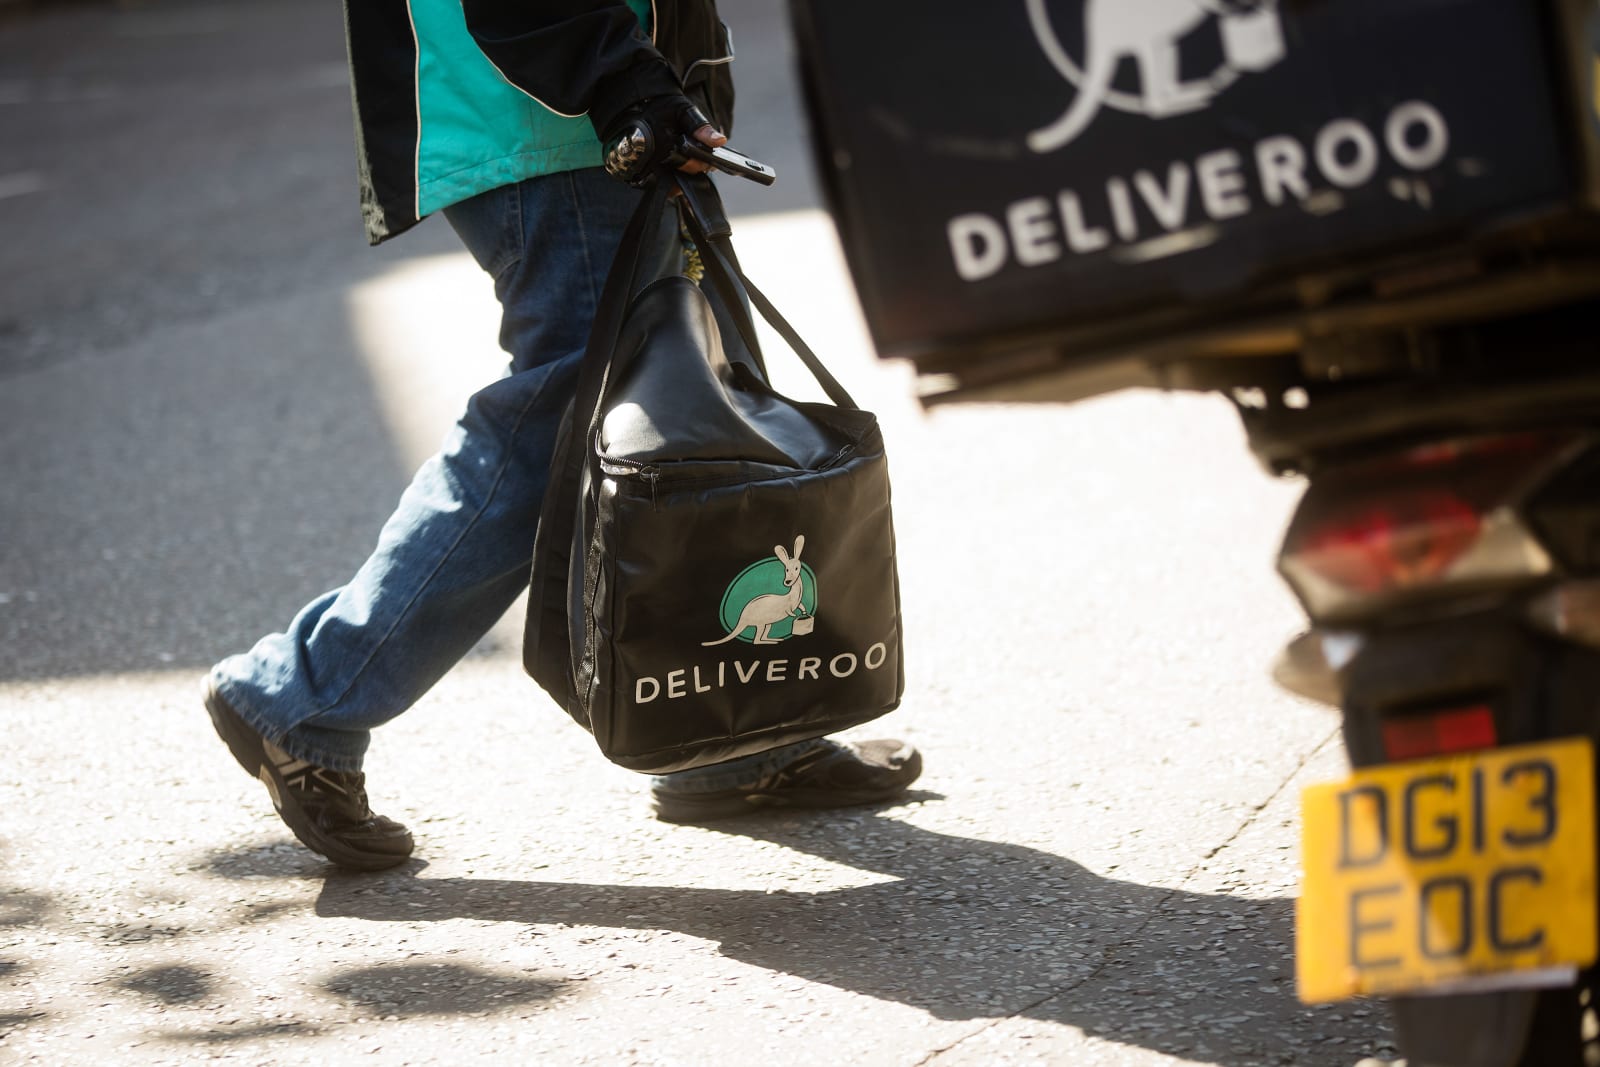 Deliveroo Drivers As Competition Is Fierce In The Food-Delivery Business